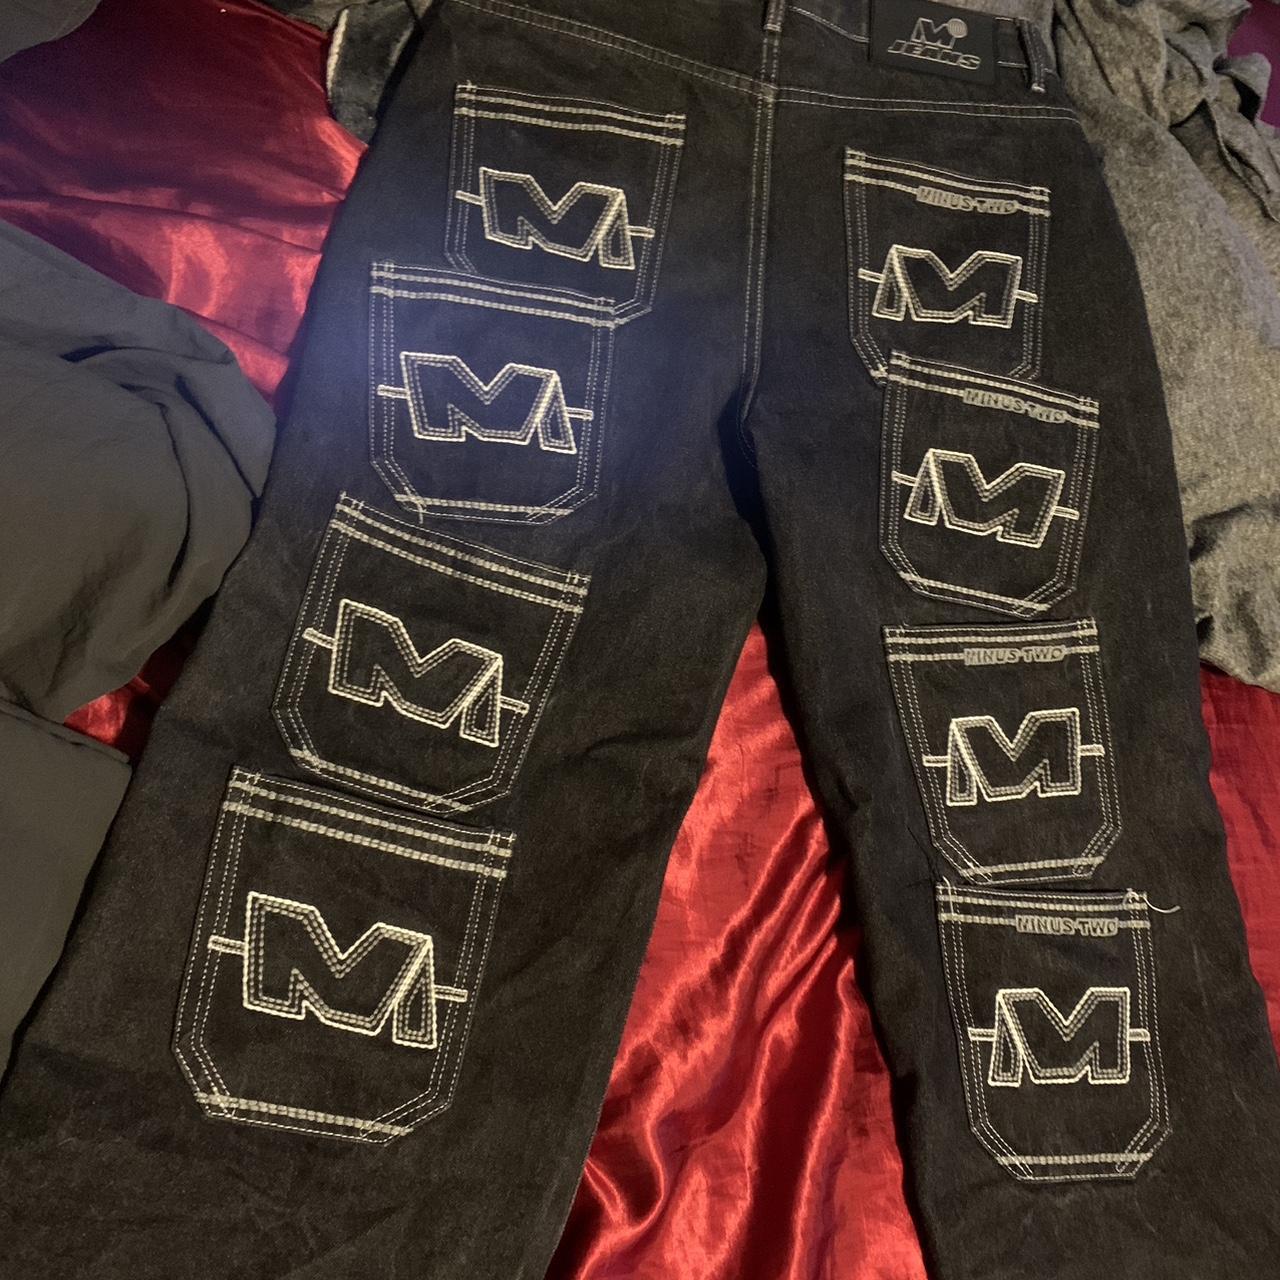 minus two multi pocket jeans #minustwo #baggy...